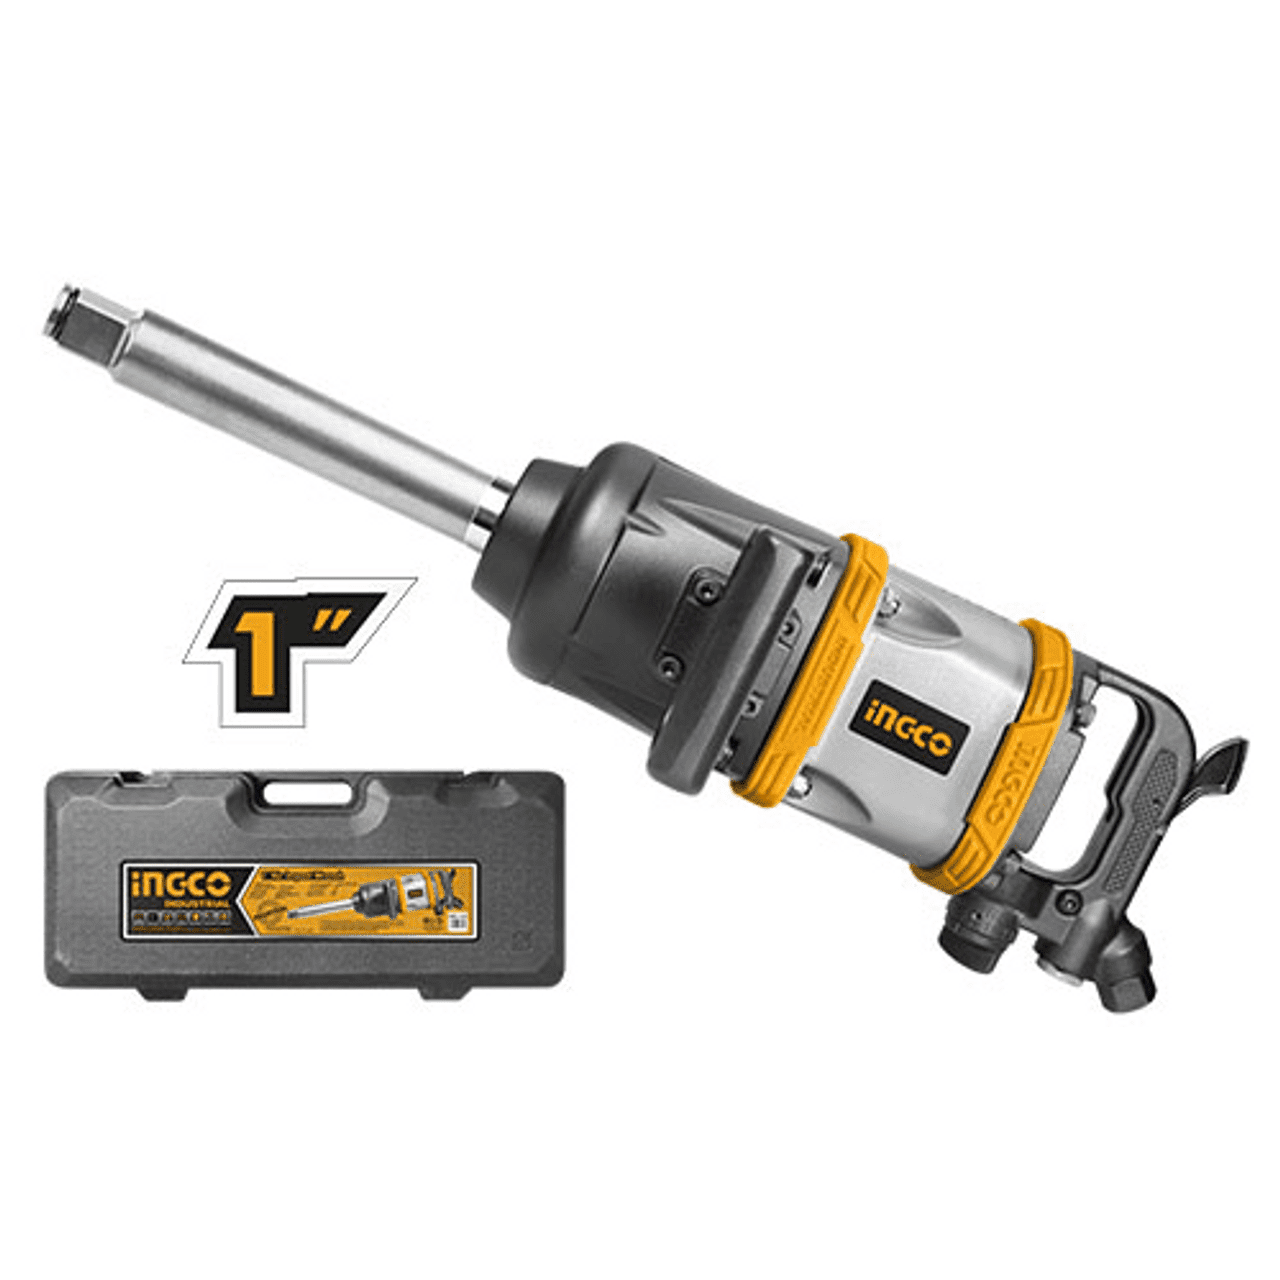 Ingco 1″ Heavy Duty Industrial Air Impact Wrench - AIW11222 | Supply Master | Accra, Ghana Impact Wrench & Driver Buy Tools hardware Building materials